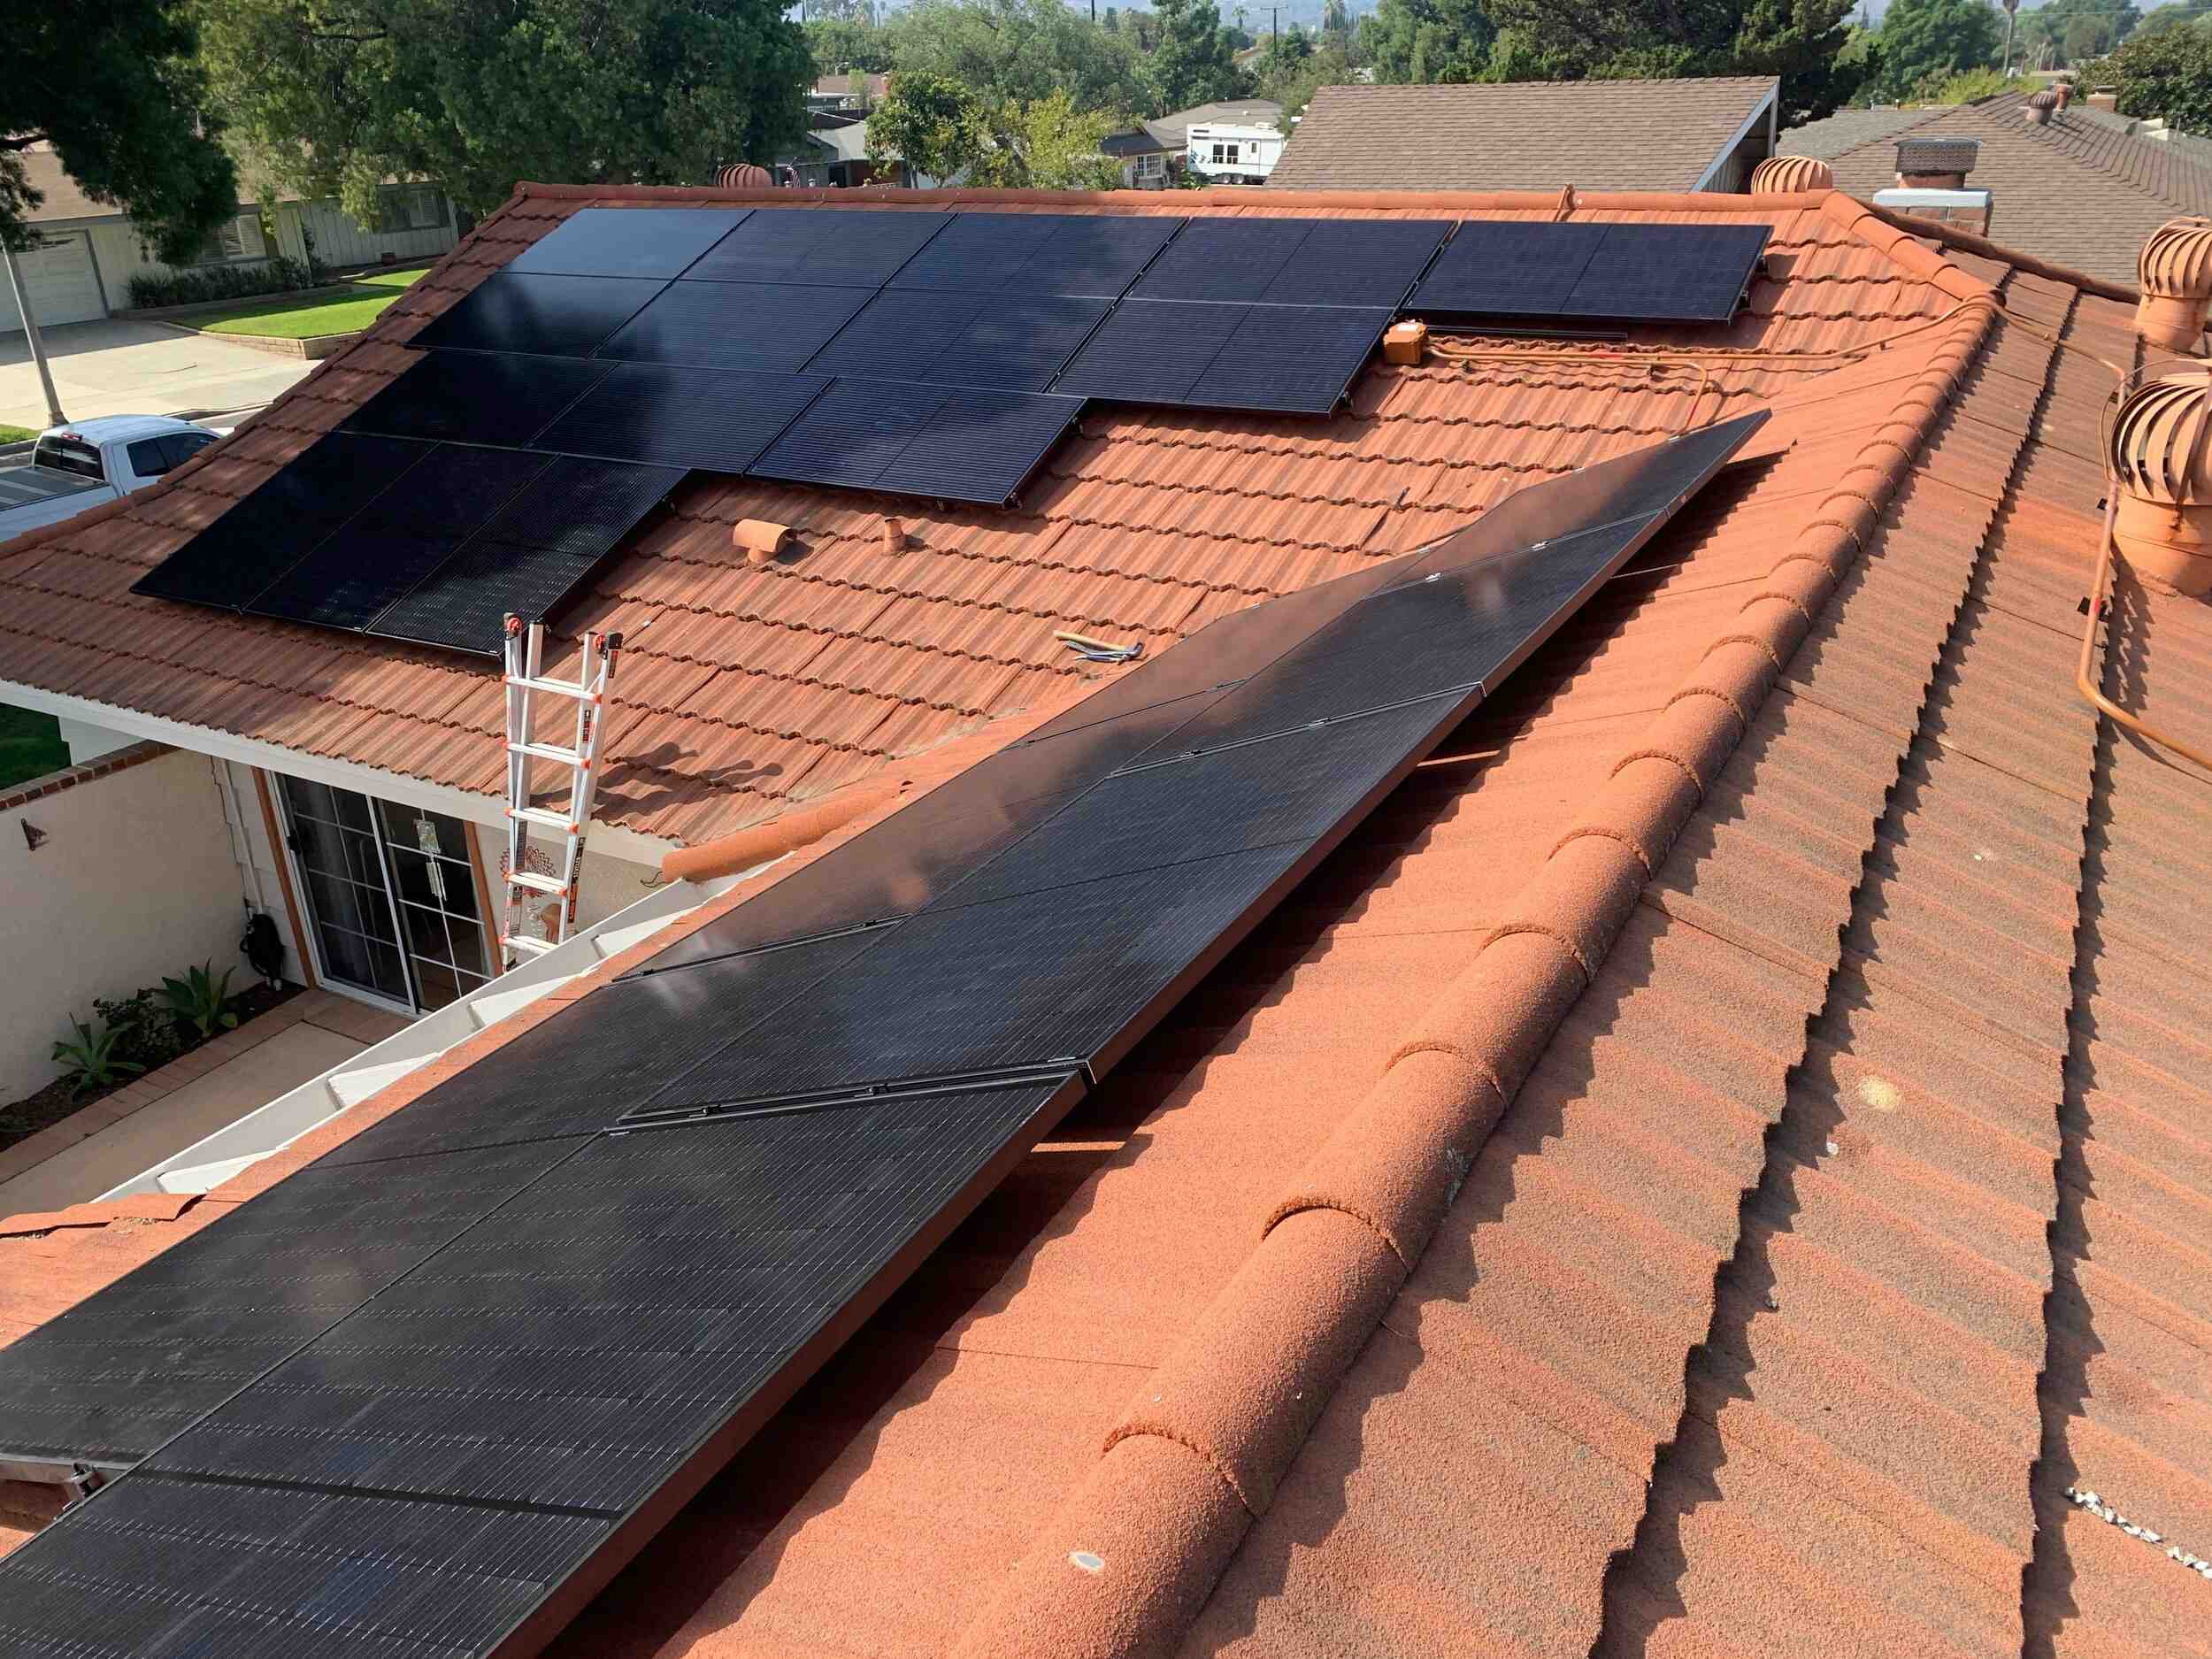 Are solar panels bad for your roof?